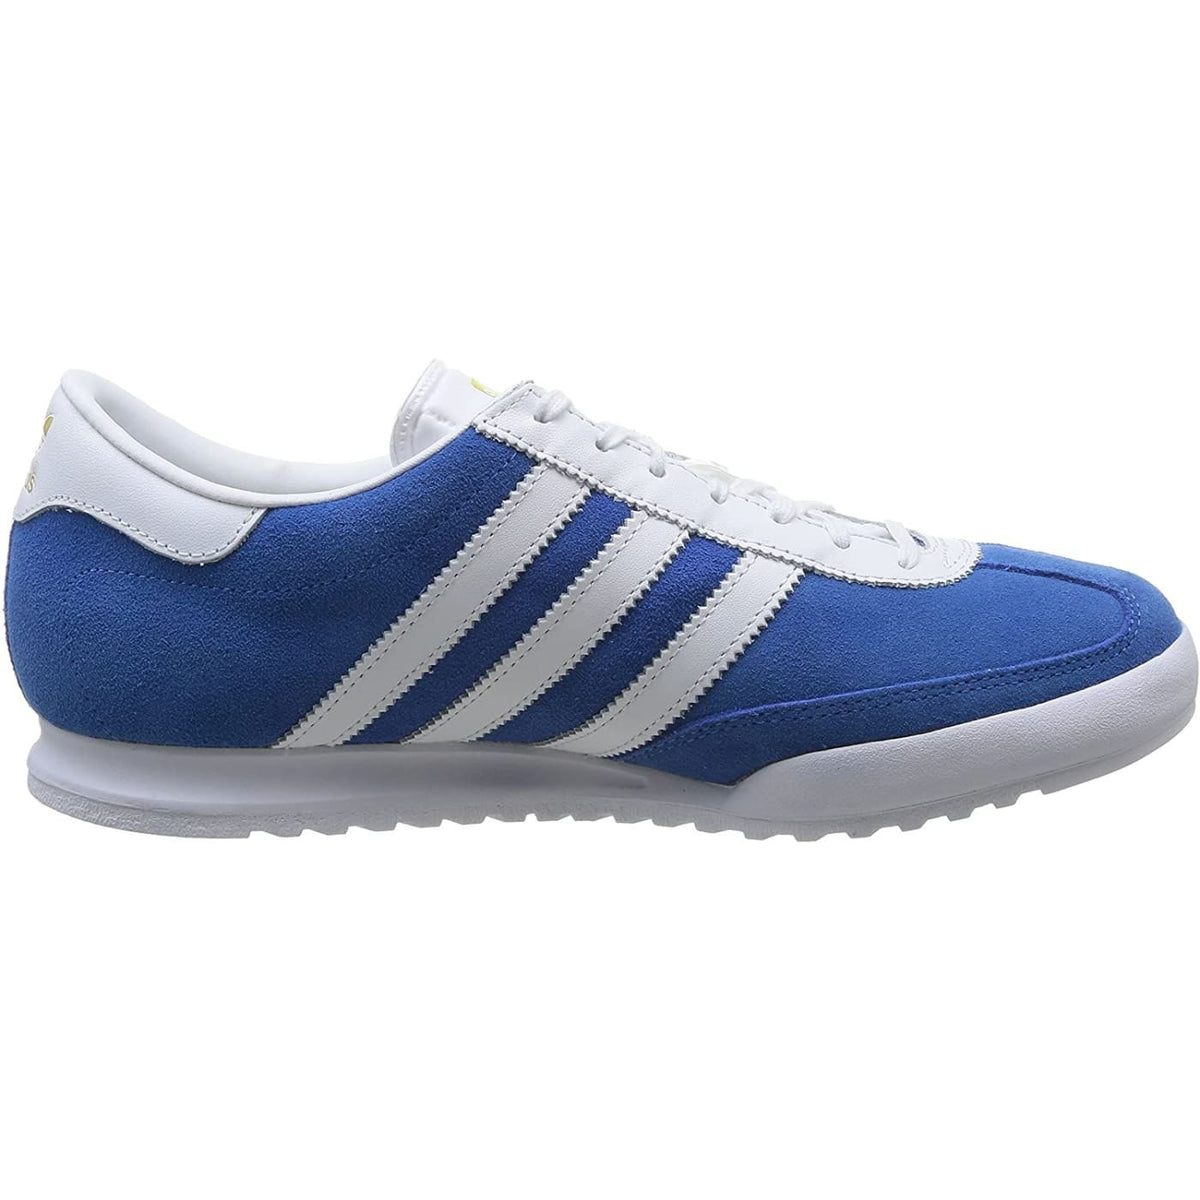 Adidas Original Blue White Mens Leather Trainers – Top Brand Shoes